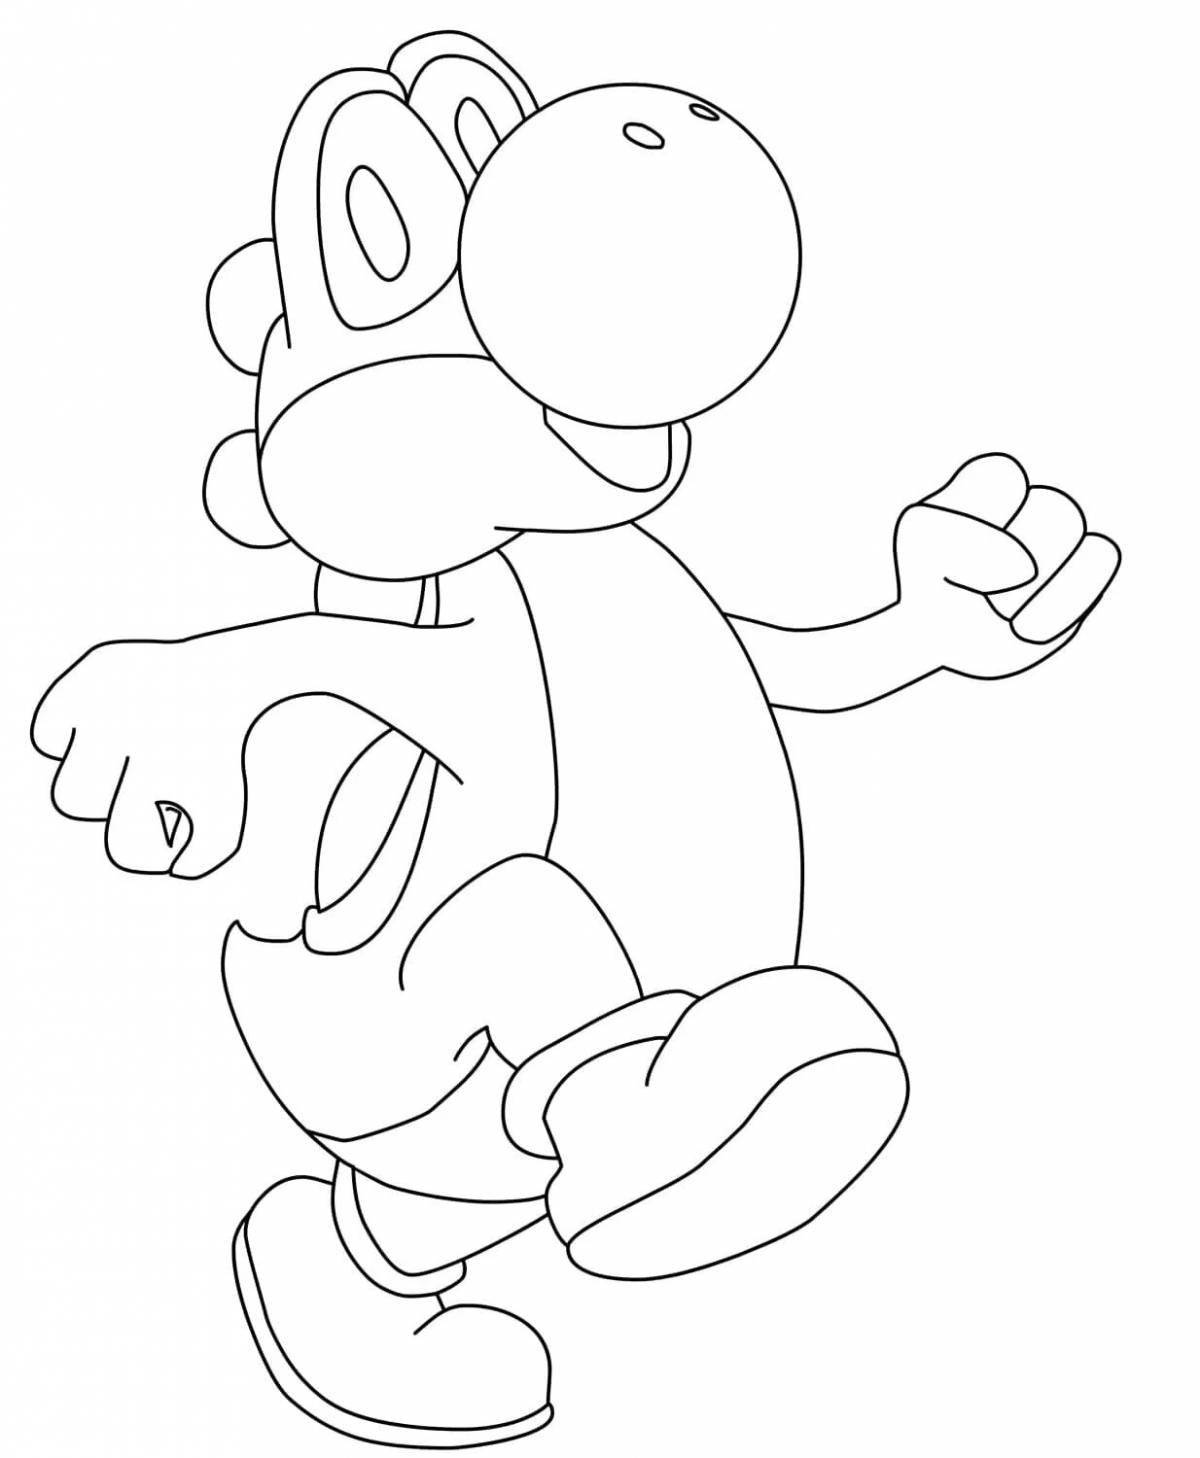 Yoshi's lovely coloring book